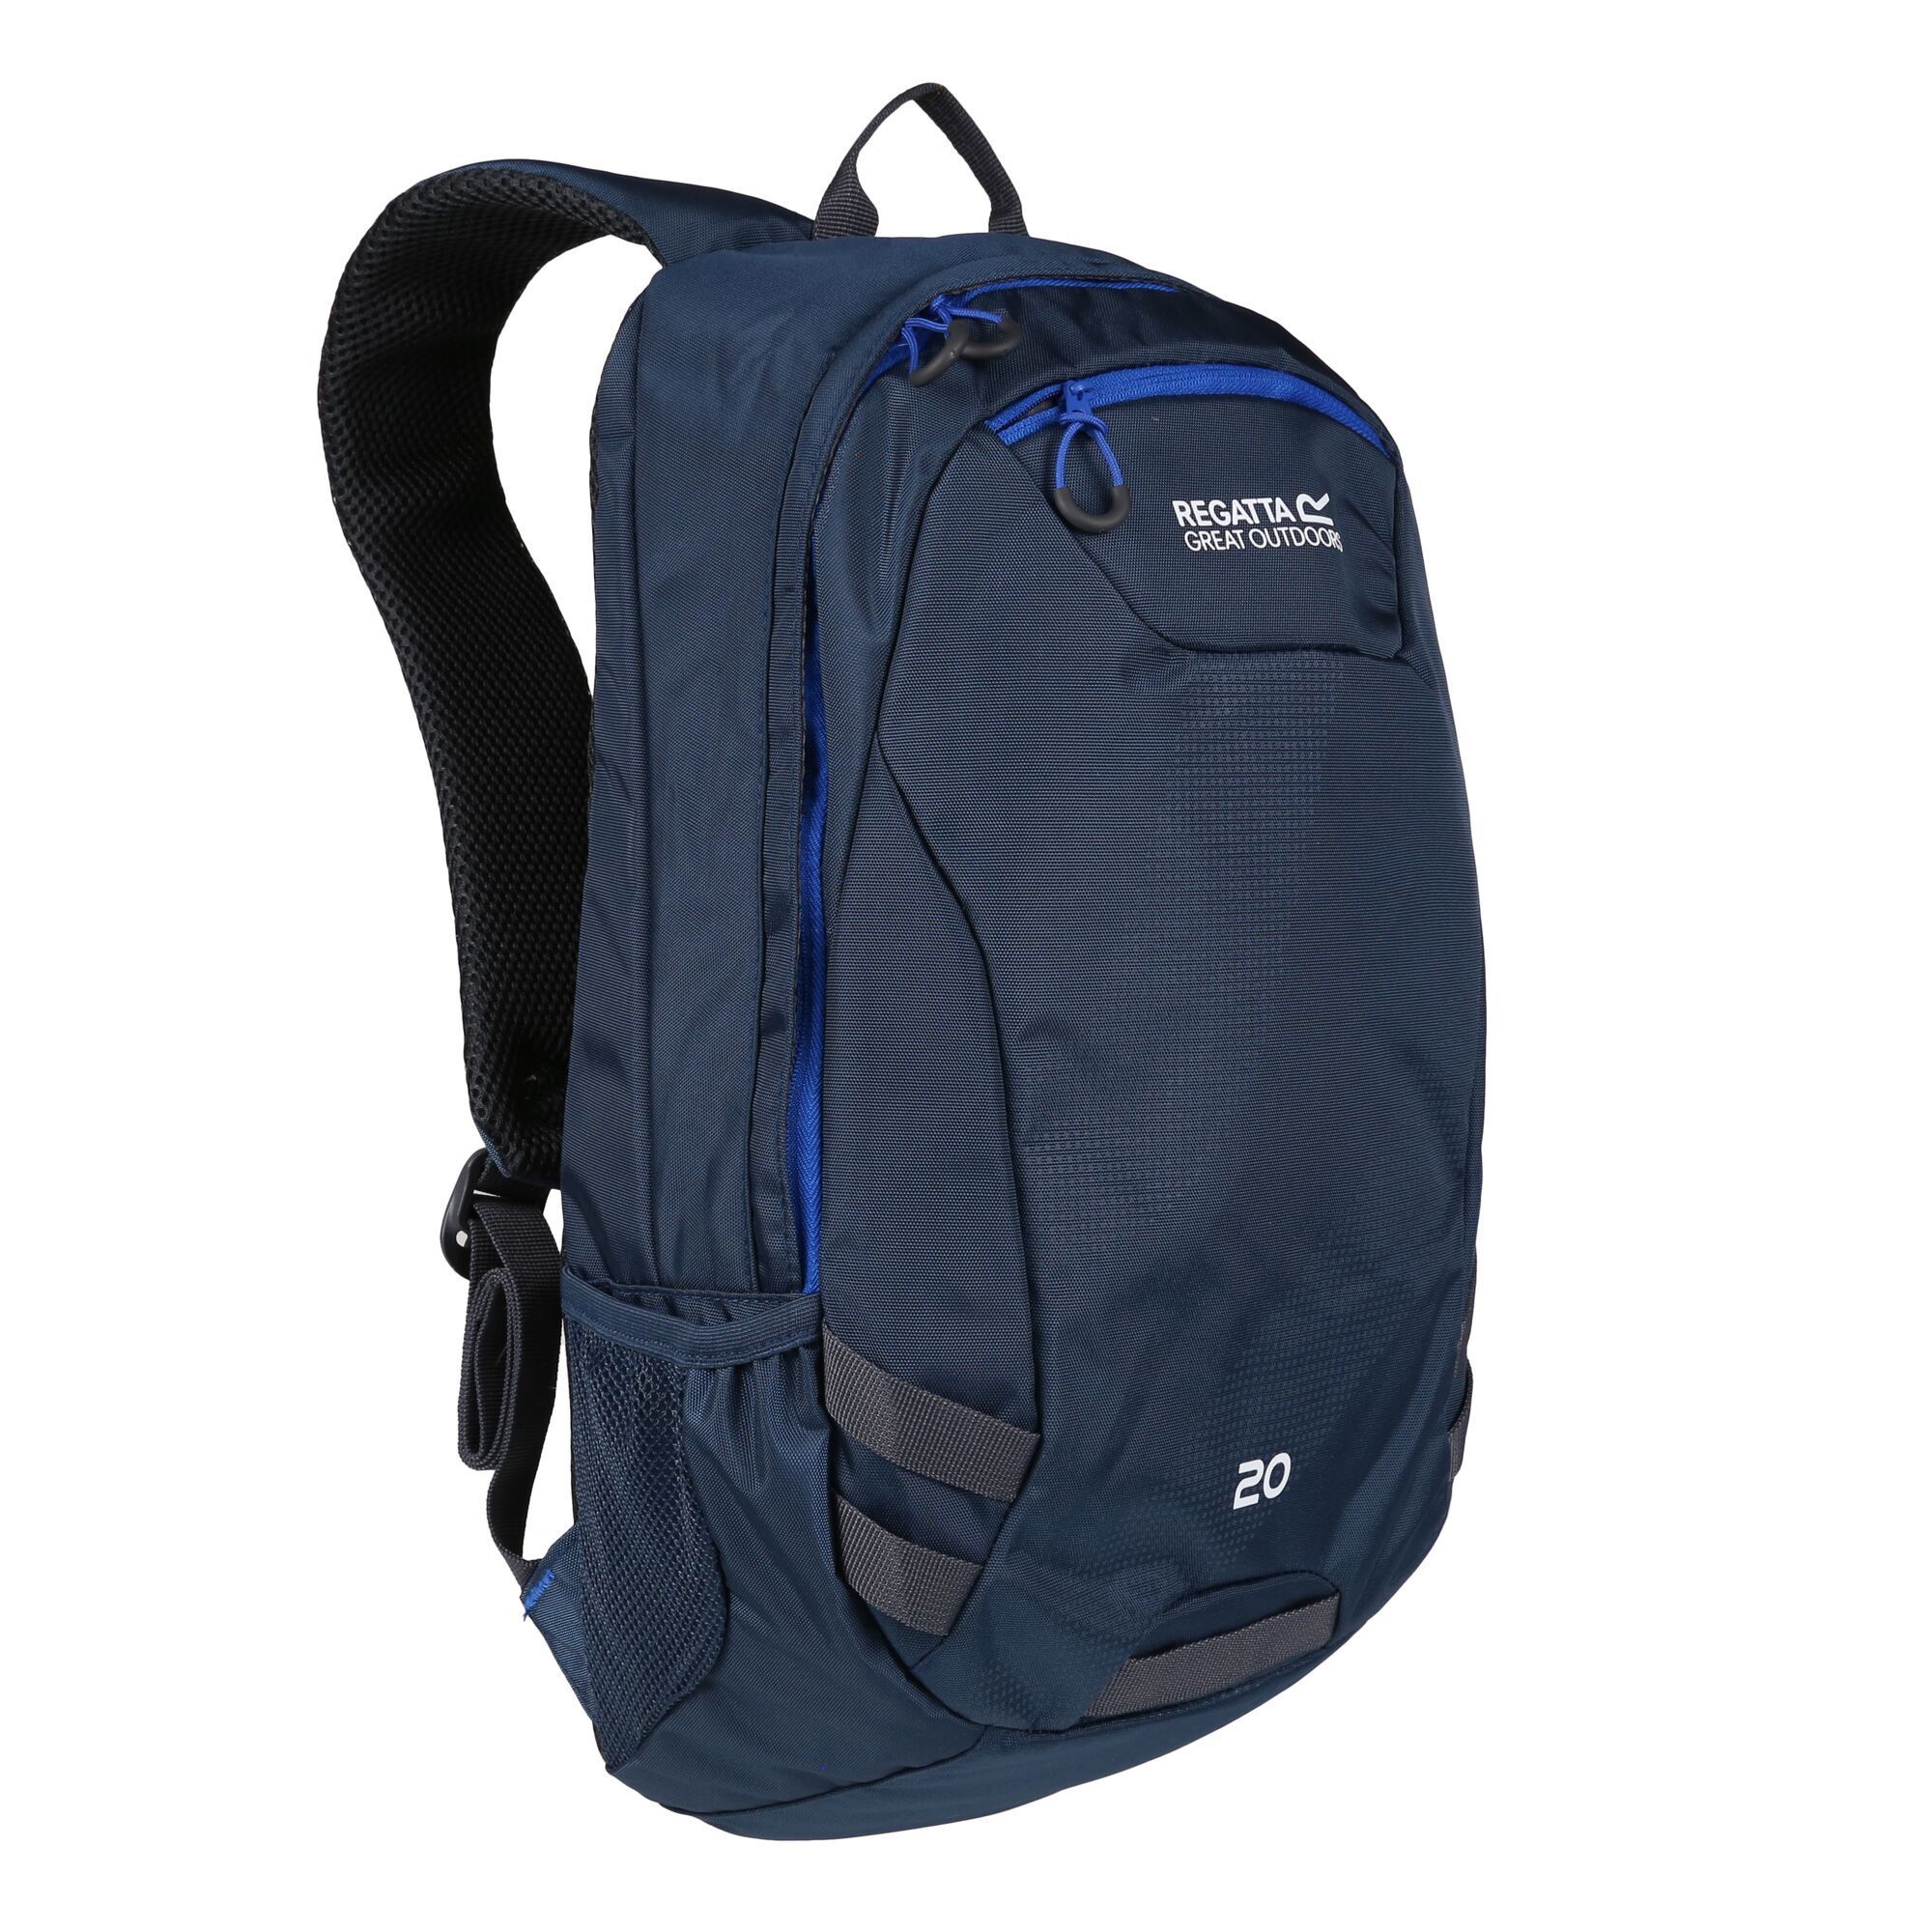 20 litre capacity. Hardwearing 600D polyester. Zipped front pocket. Front webbing attachment loops. 2 internal security pockets. Internal key clip. Easy grab zip pullers.